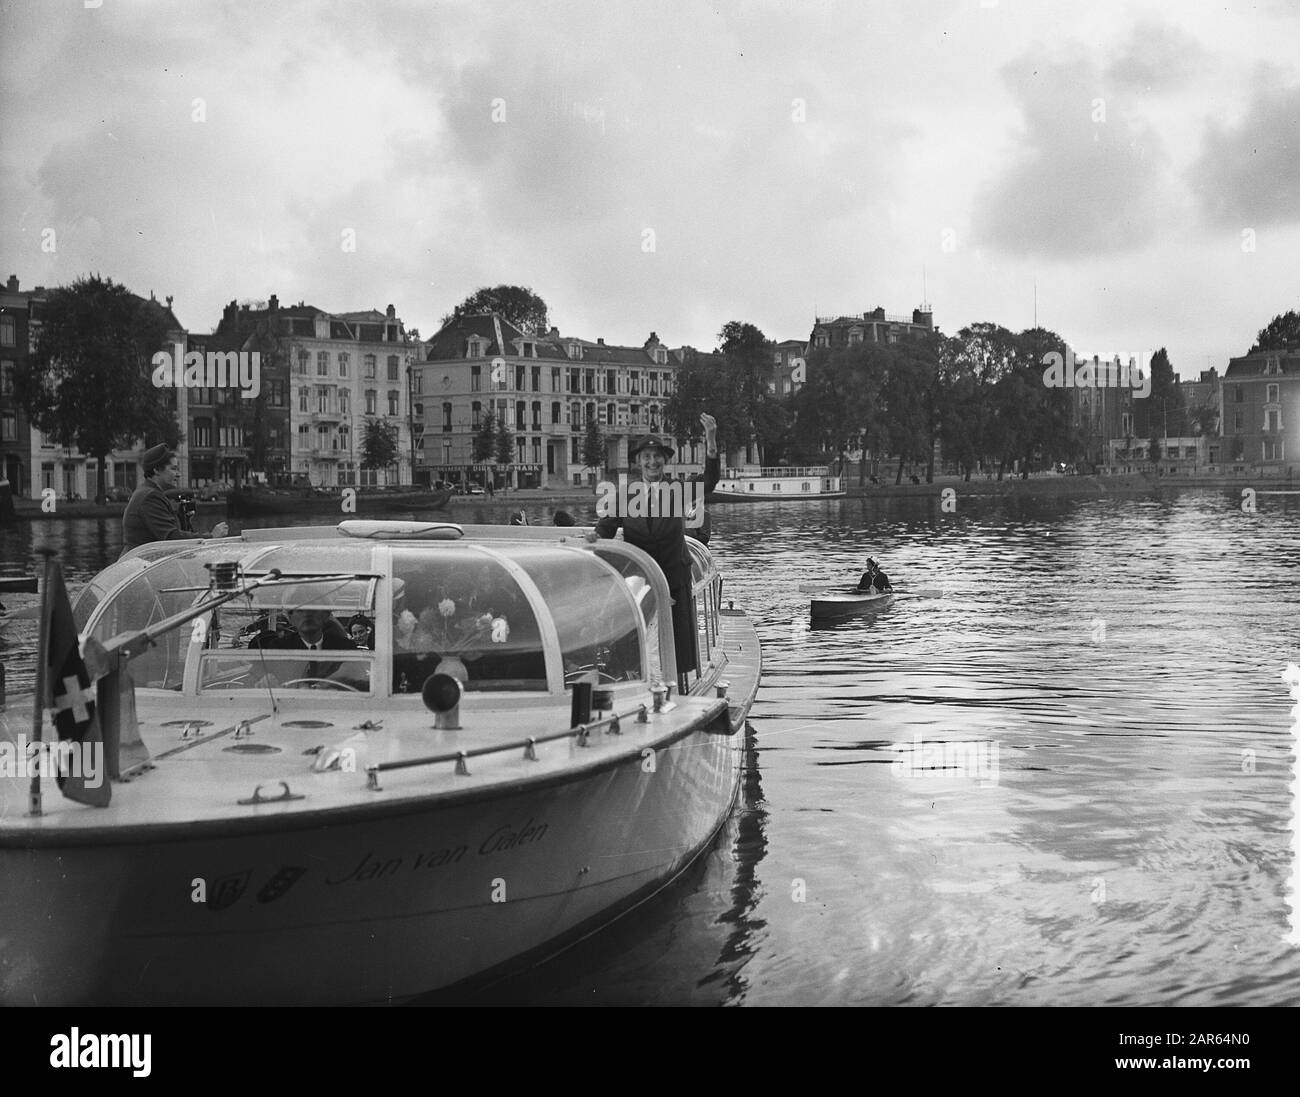 Girls Boy Scouts bring a greeting from their boats to Lady Baden-Powell who is in a canal boat Date: 20 August 1954 Location: Amsterdam, Noord-Holland Keywords: boats, Boy Scout, Boy Scouts, sightseeing boats Personal name: Baden-Powell Stock Photo